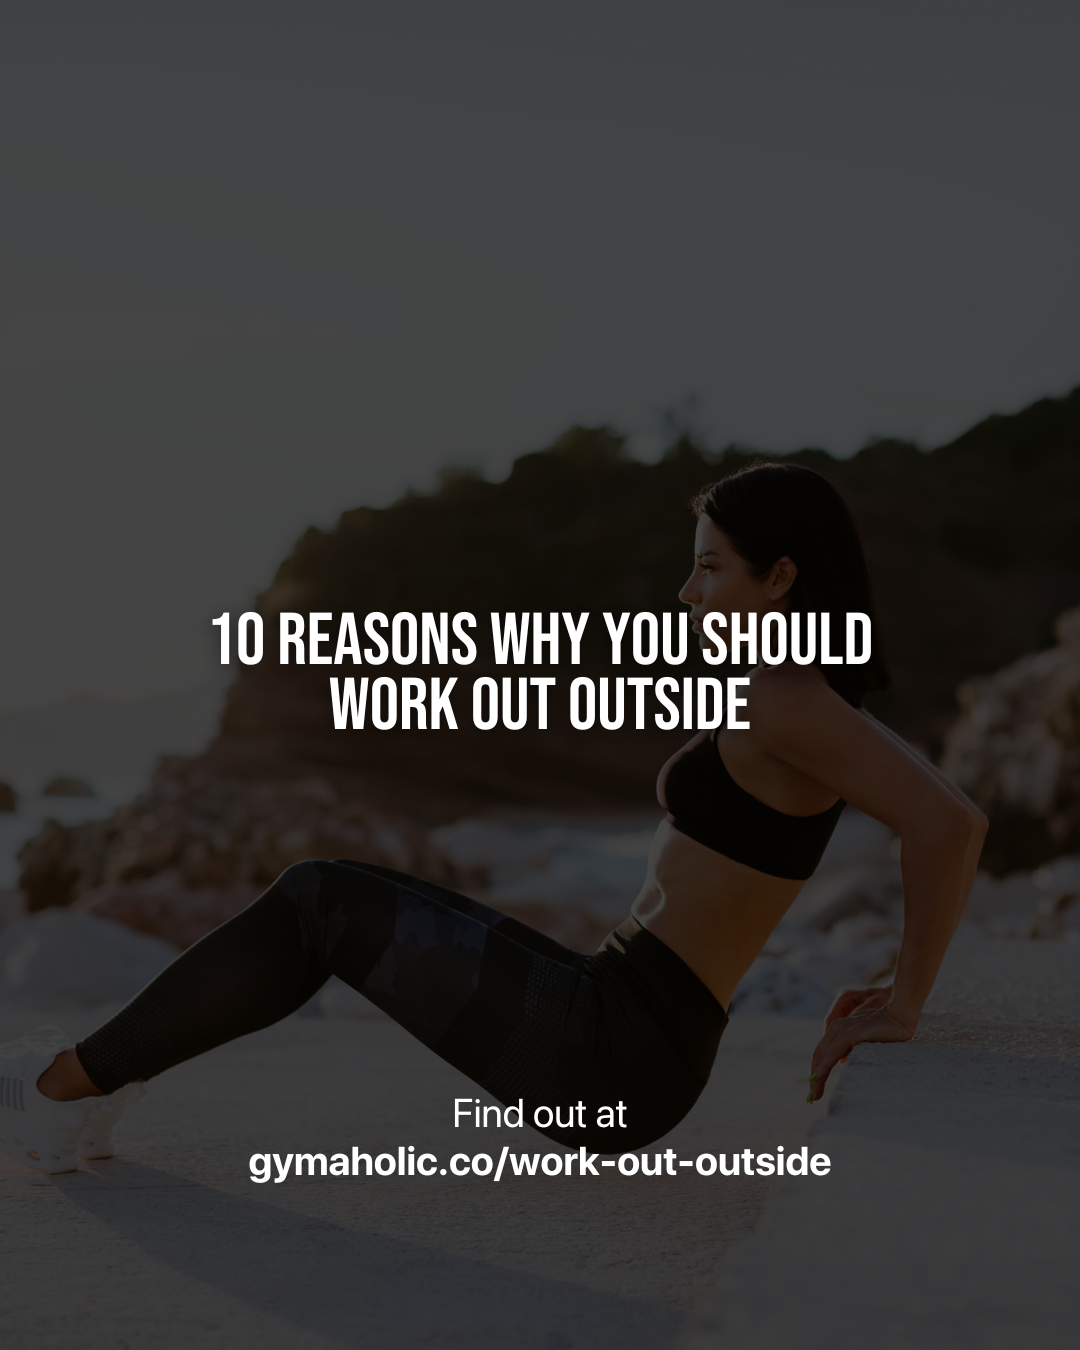 10 Reasons Why You Should Work Out Outside